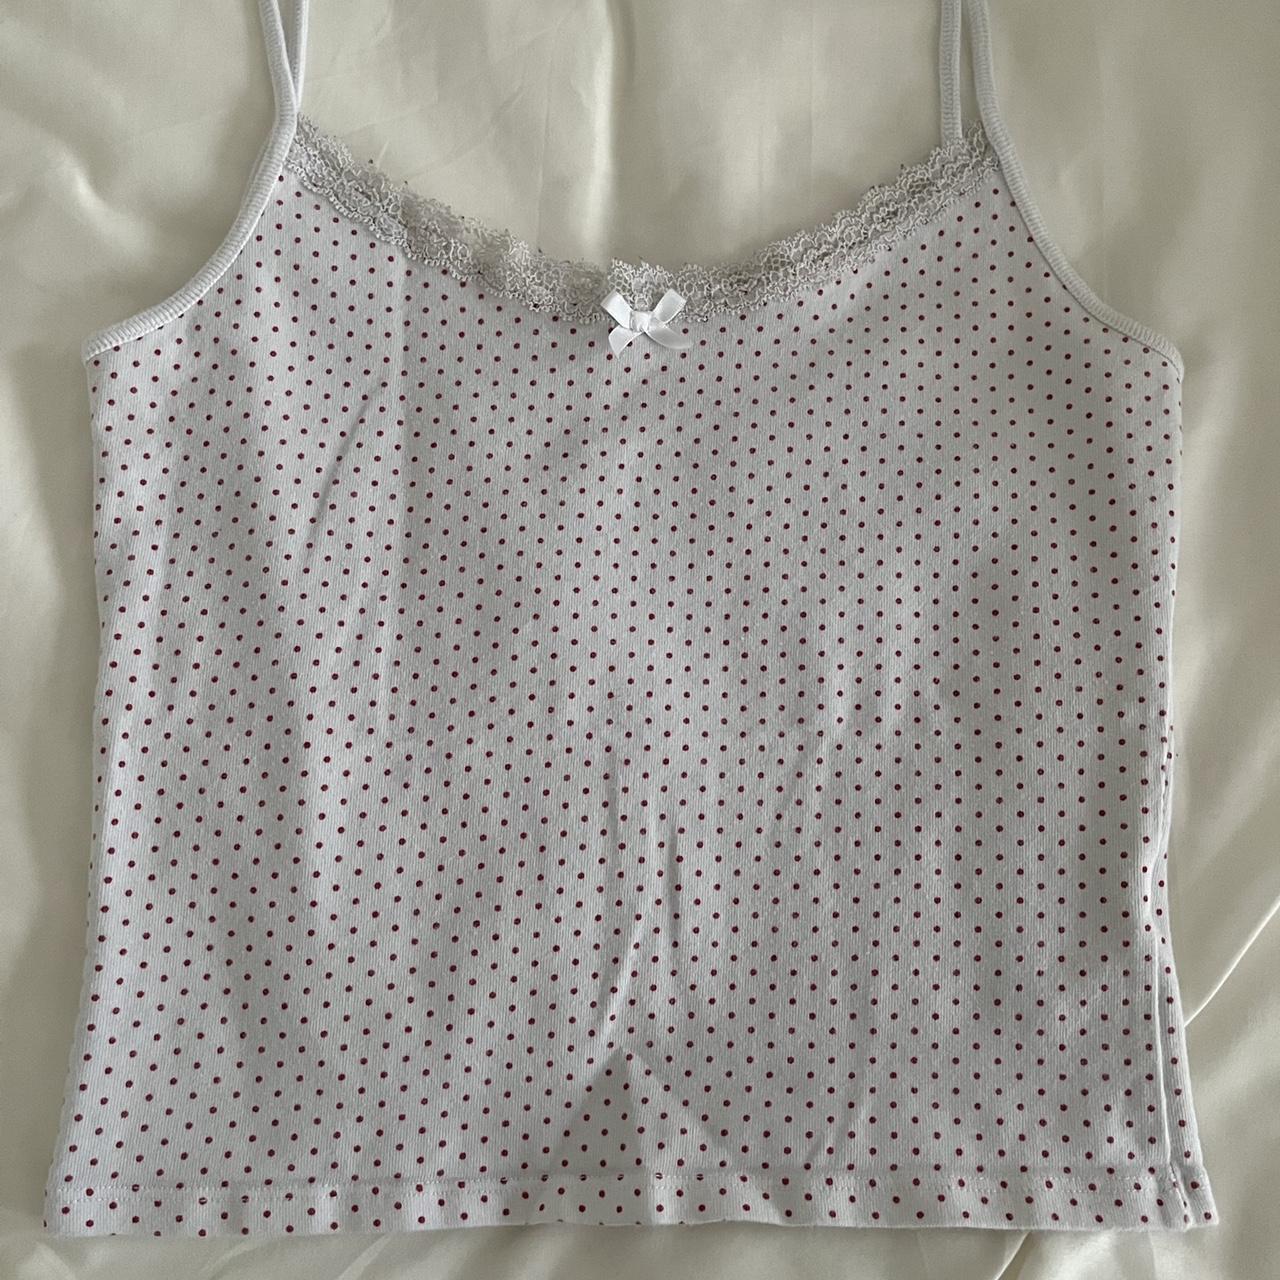 brandy melville tank, never worn, one size, open to